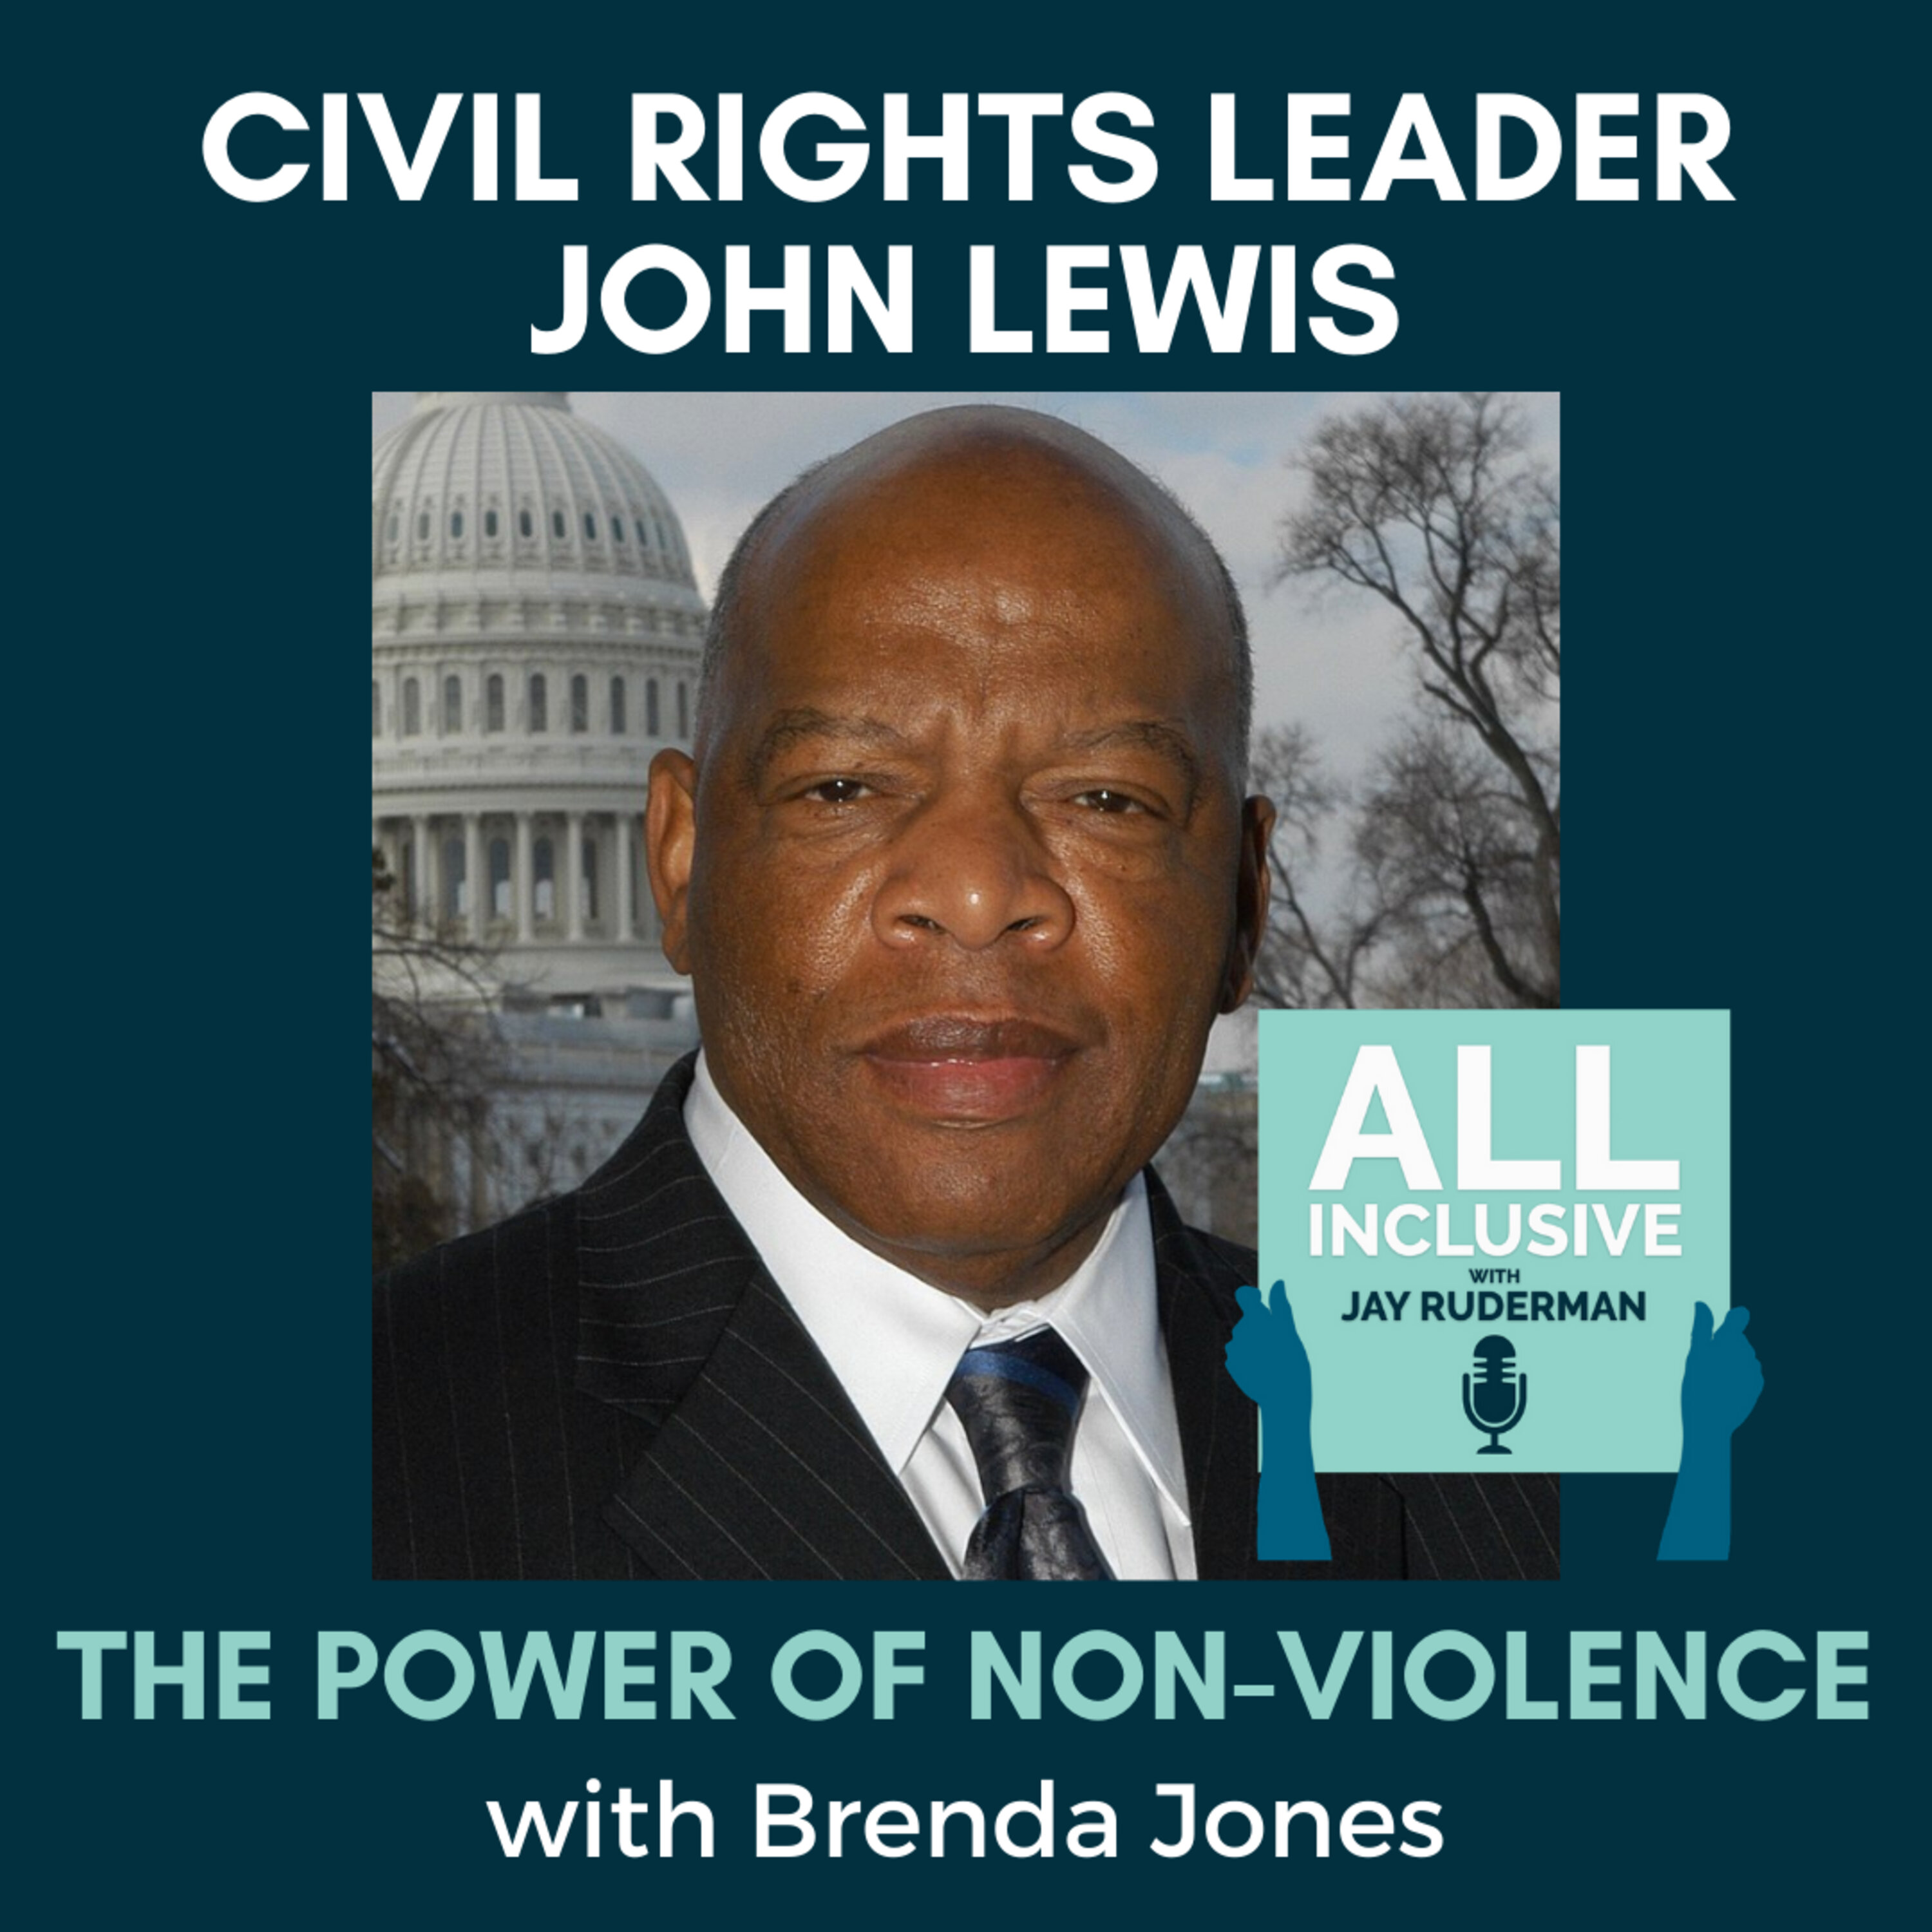 Civil Rights Leader John Lewis and the Power Of Non-Violence with Brenda Jones